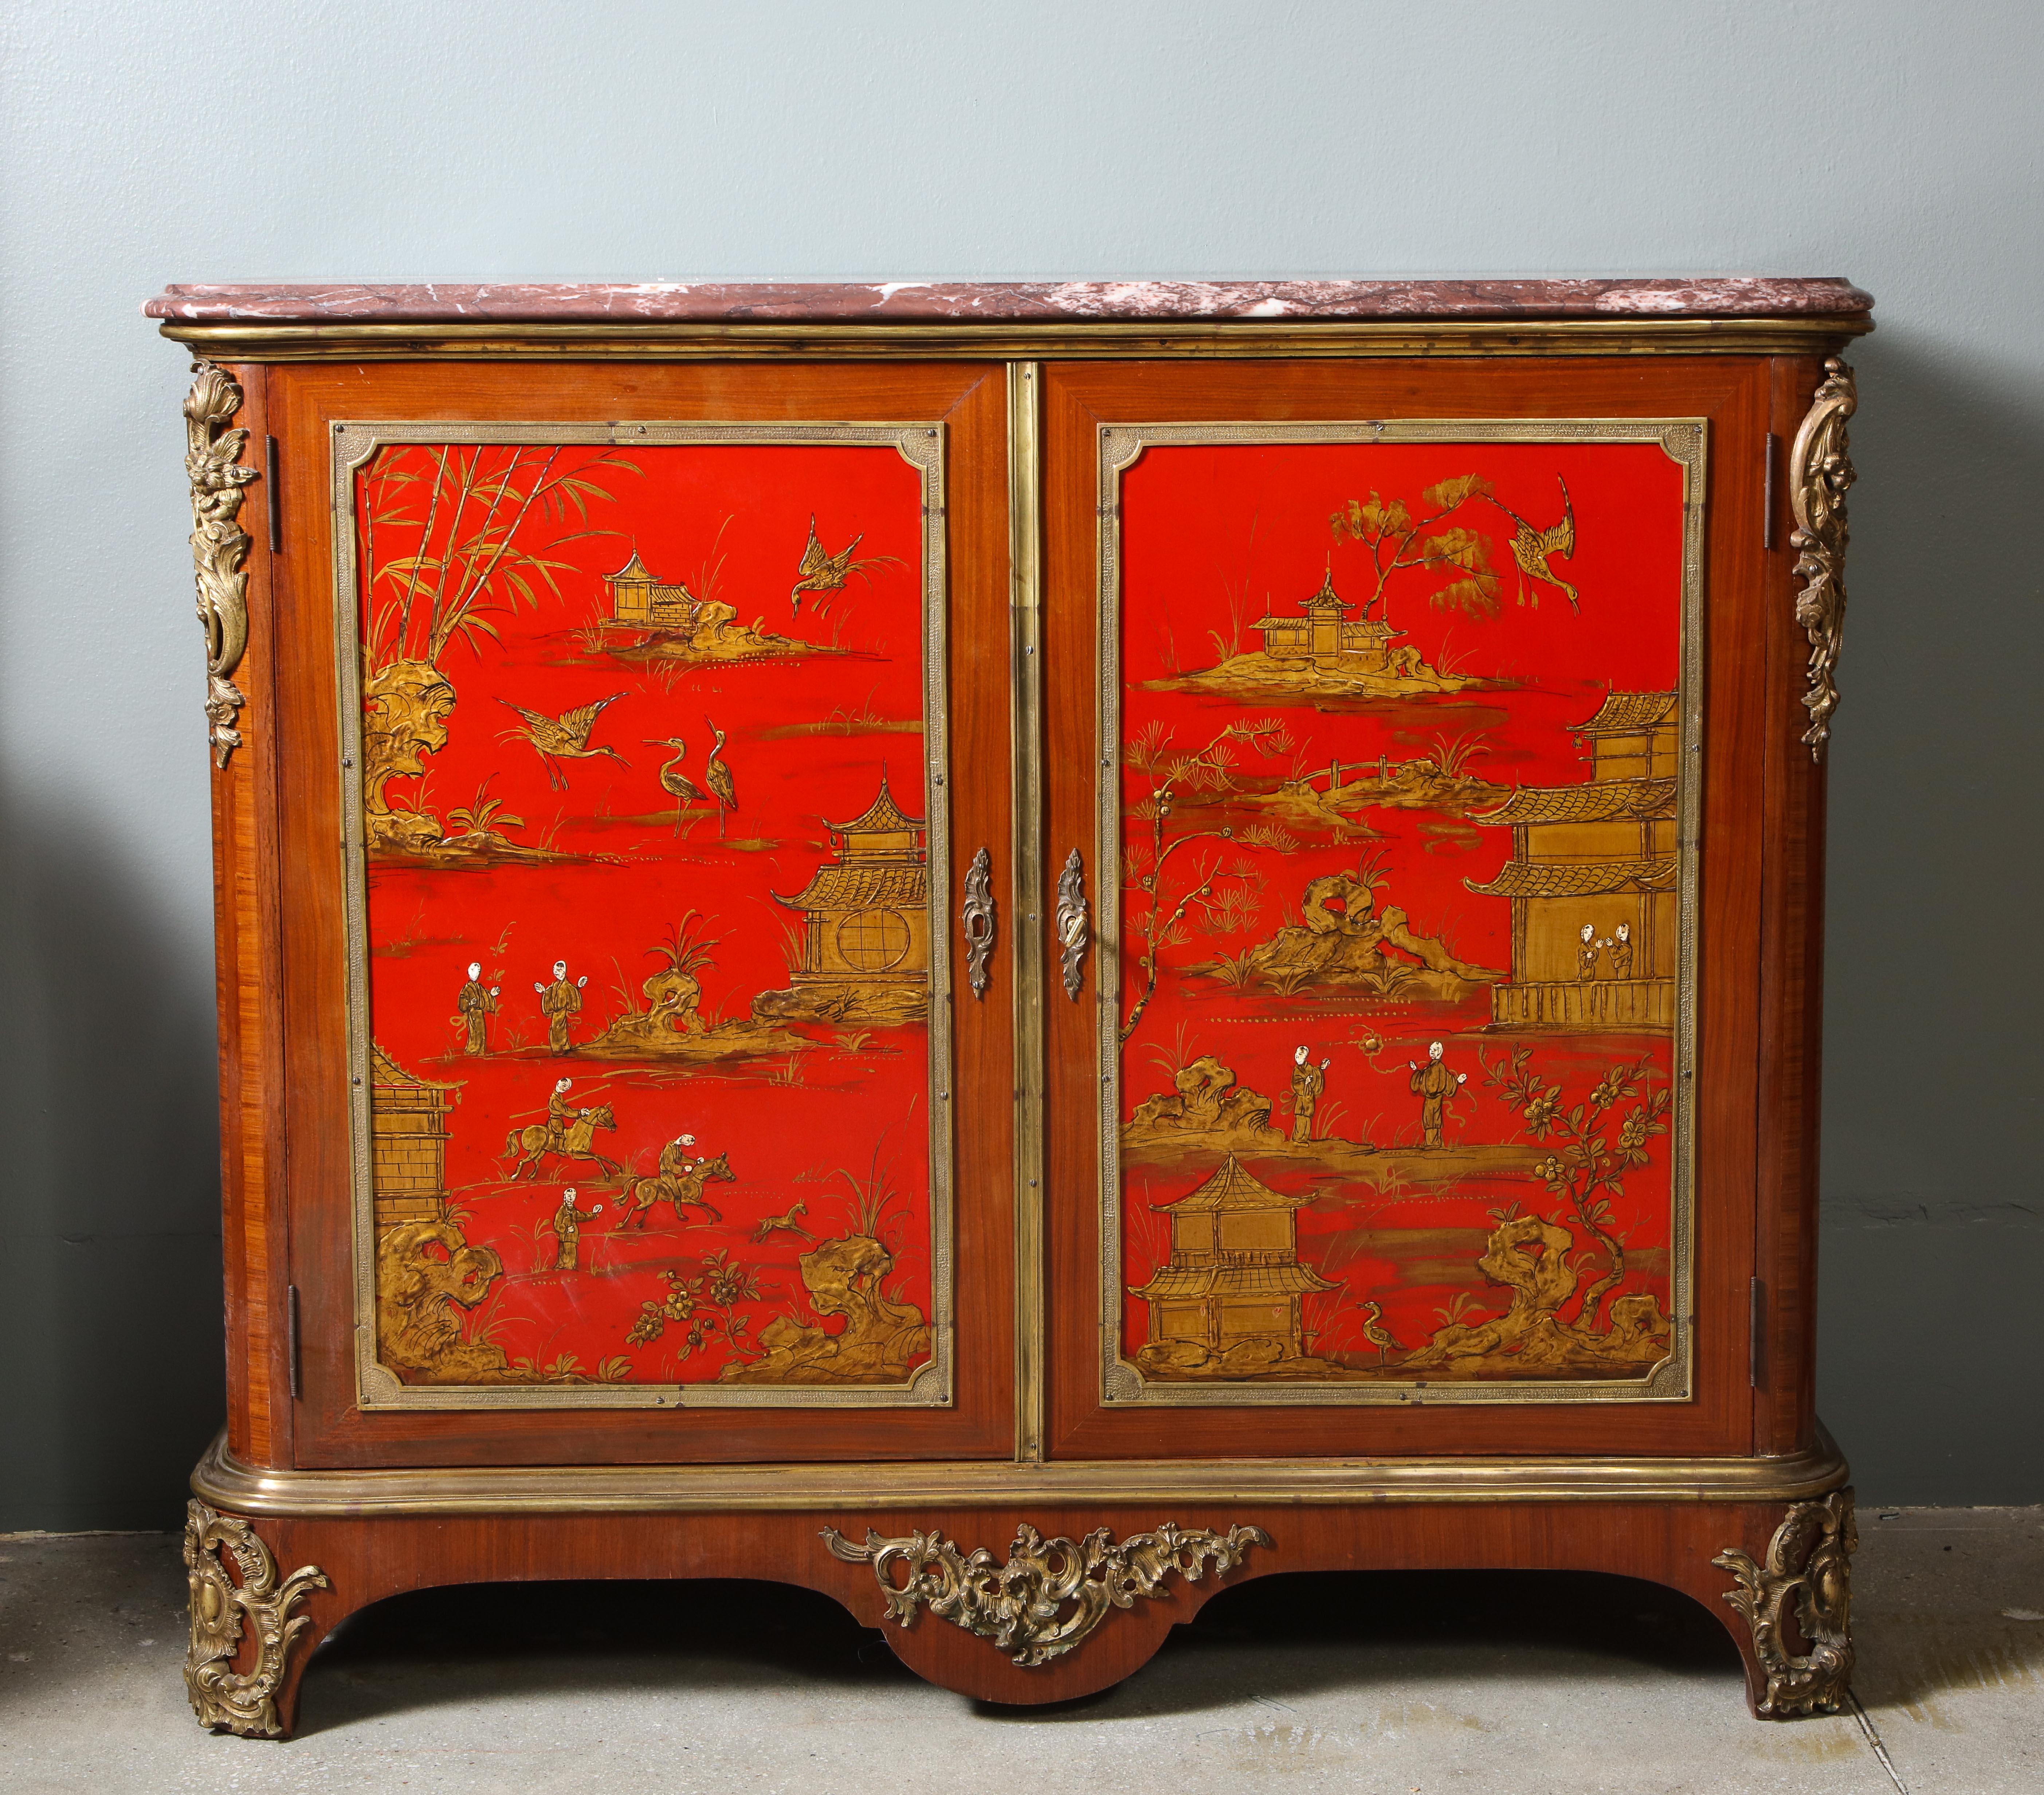 Each chinoiserie lacquered and gilt bronze mounted cabinet, attributed to Maison Jansen, with a marble top, over a pair of doors with bronze framed red lacquer panels, the sides with conforming decoration, the whole all over decorated with gilt